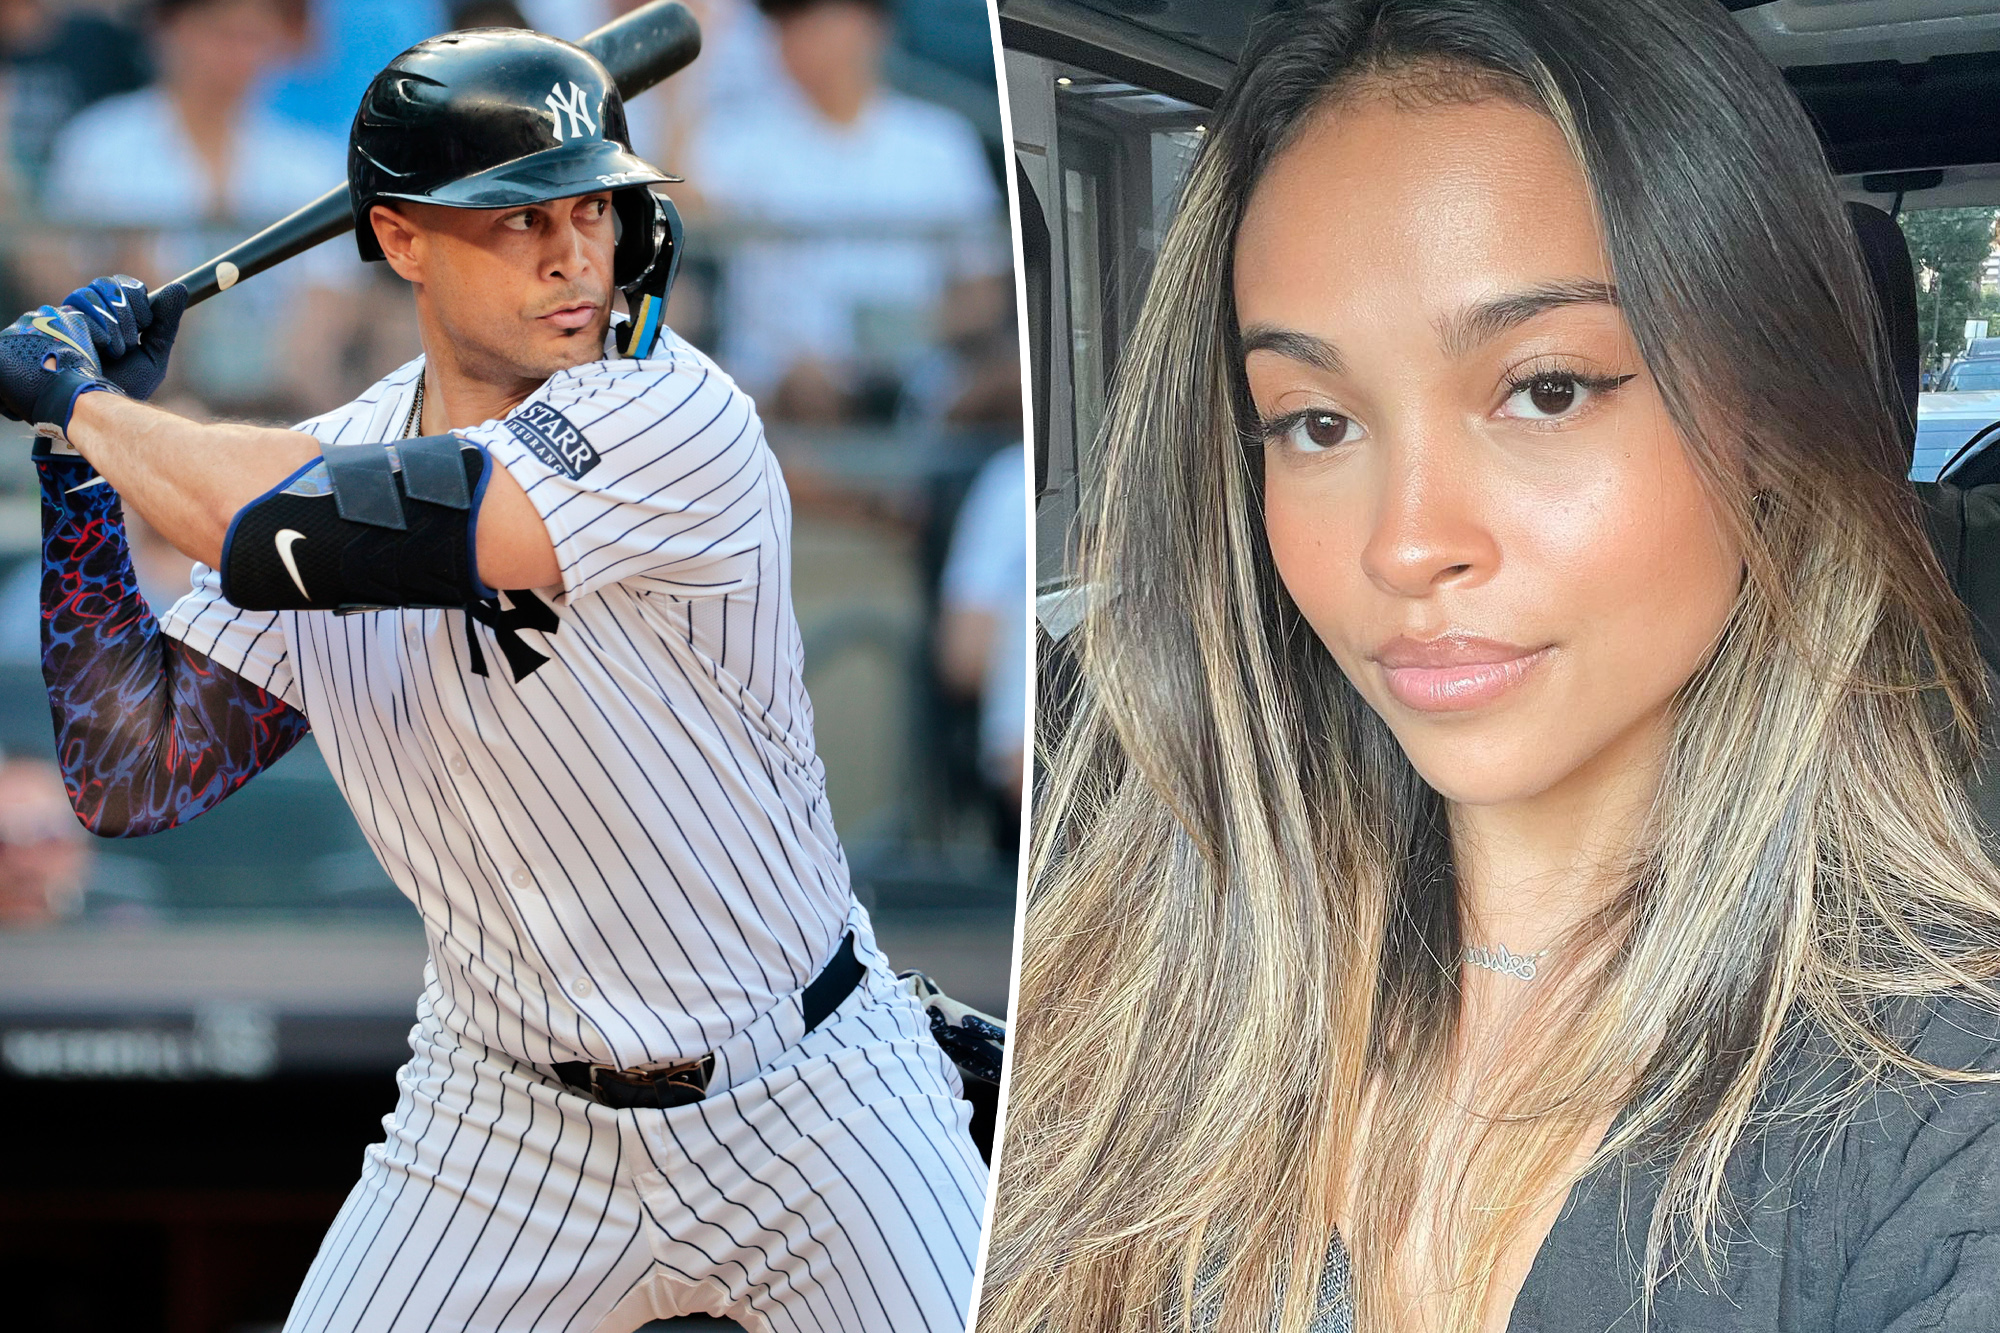 Yankees Star Giancarlo Stanton's Sudden Breakup Shocks Fans: What Went Wrong?